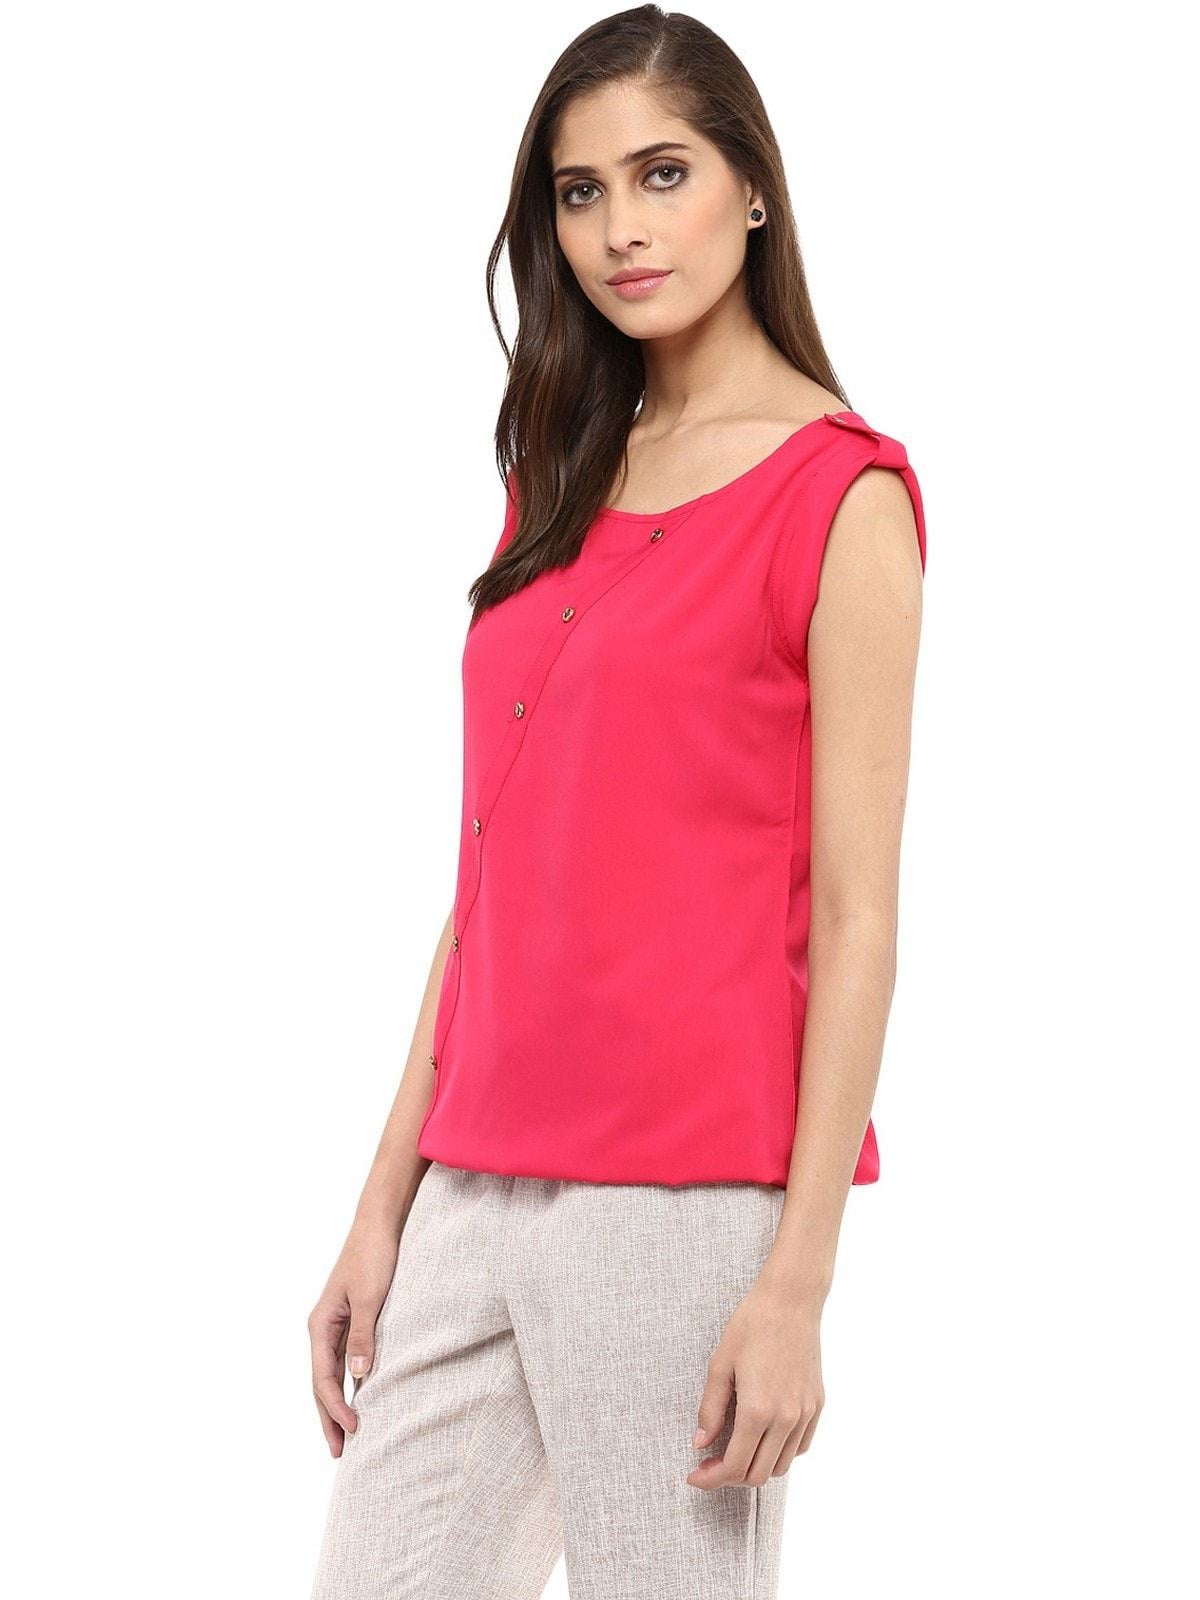 Women's Pink Top With Fake Shoulder-Tab - Pannkh